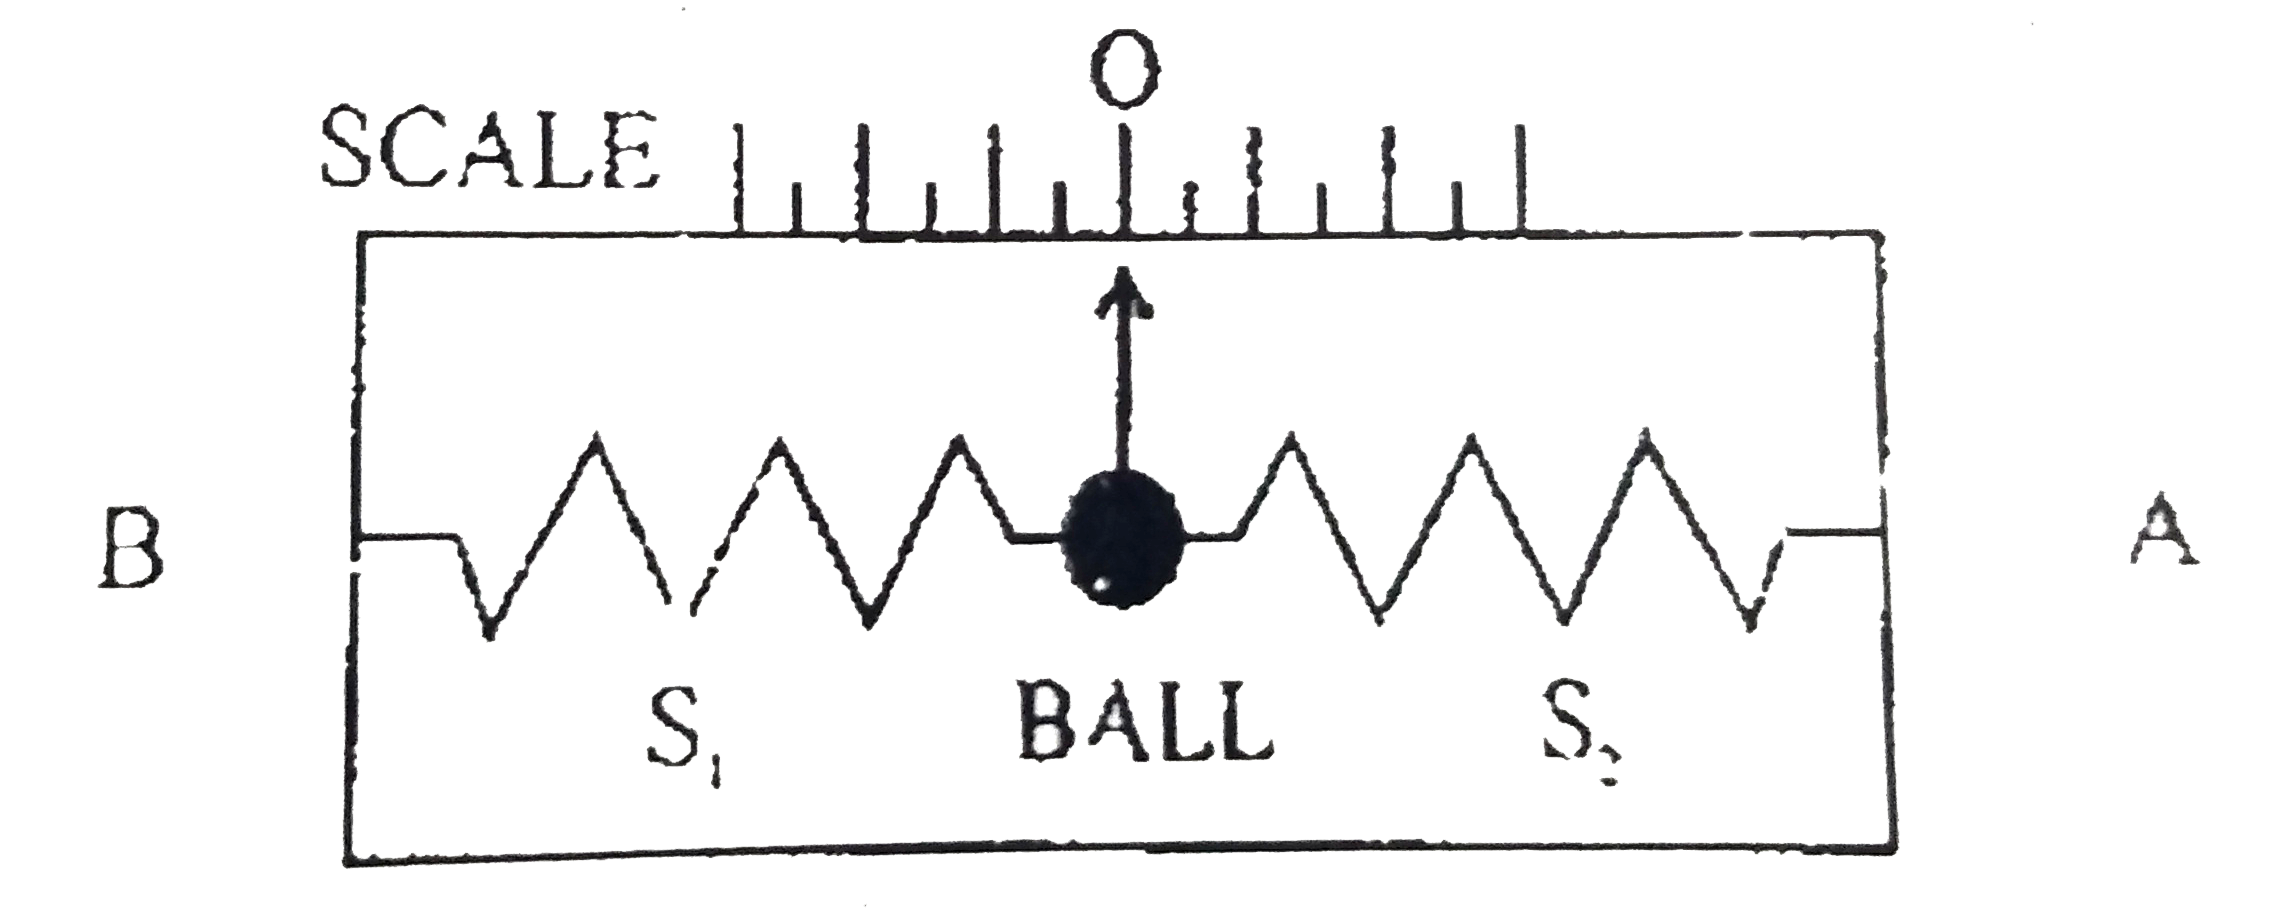 The device in figure is an acceleraometer which is fitted to a car. It consist of a spherical ball, mass 0.08 kg, attached to a pointer which can move horizontally against a fixed scale that gives the acceleration of the car, O indicates zero acceleration. On each side of the ball are attached identical springs, S(1) and S(2). that are fixed at their ends. The device is enclosed in a rigid transparent housing. The car accelerates towards A.      If the car starts from rest at time t=0 and travels along a straight road. The accelerometer readings are recorded in table.   {:(